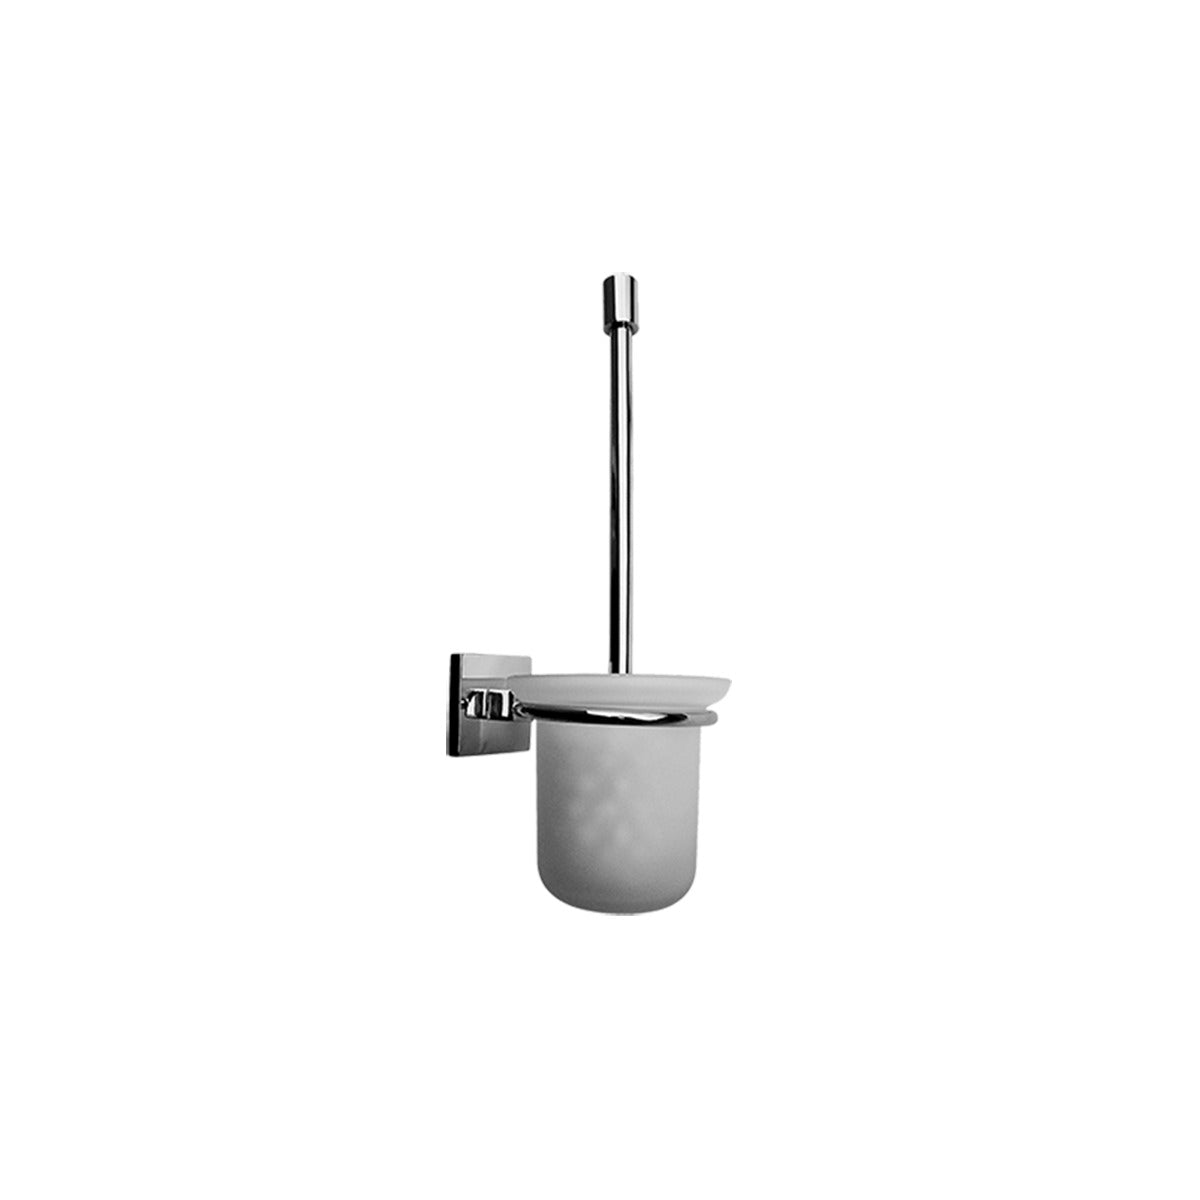 Graff Luna Wall Mounted Toilet Brush, Available in Polished Chrome, & Satin Nickel. Please see order options.